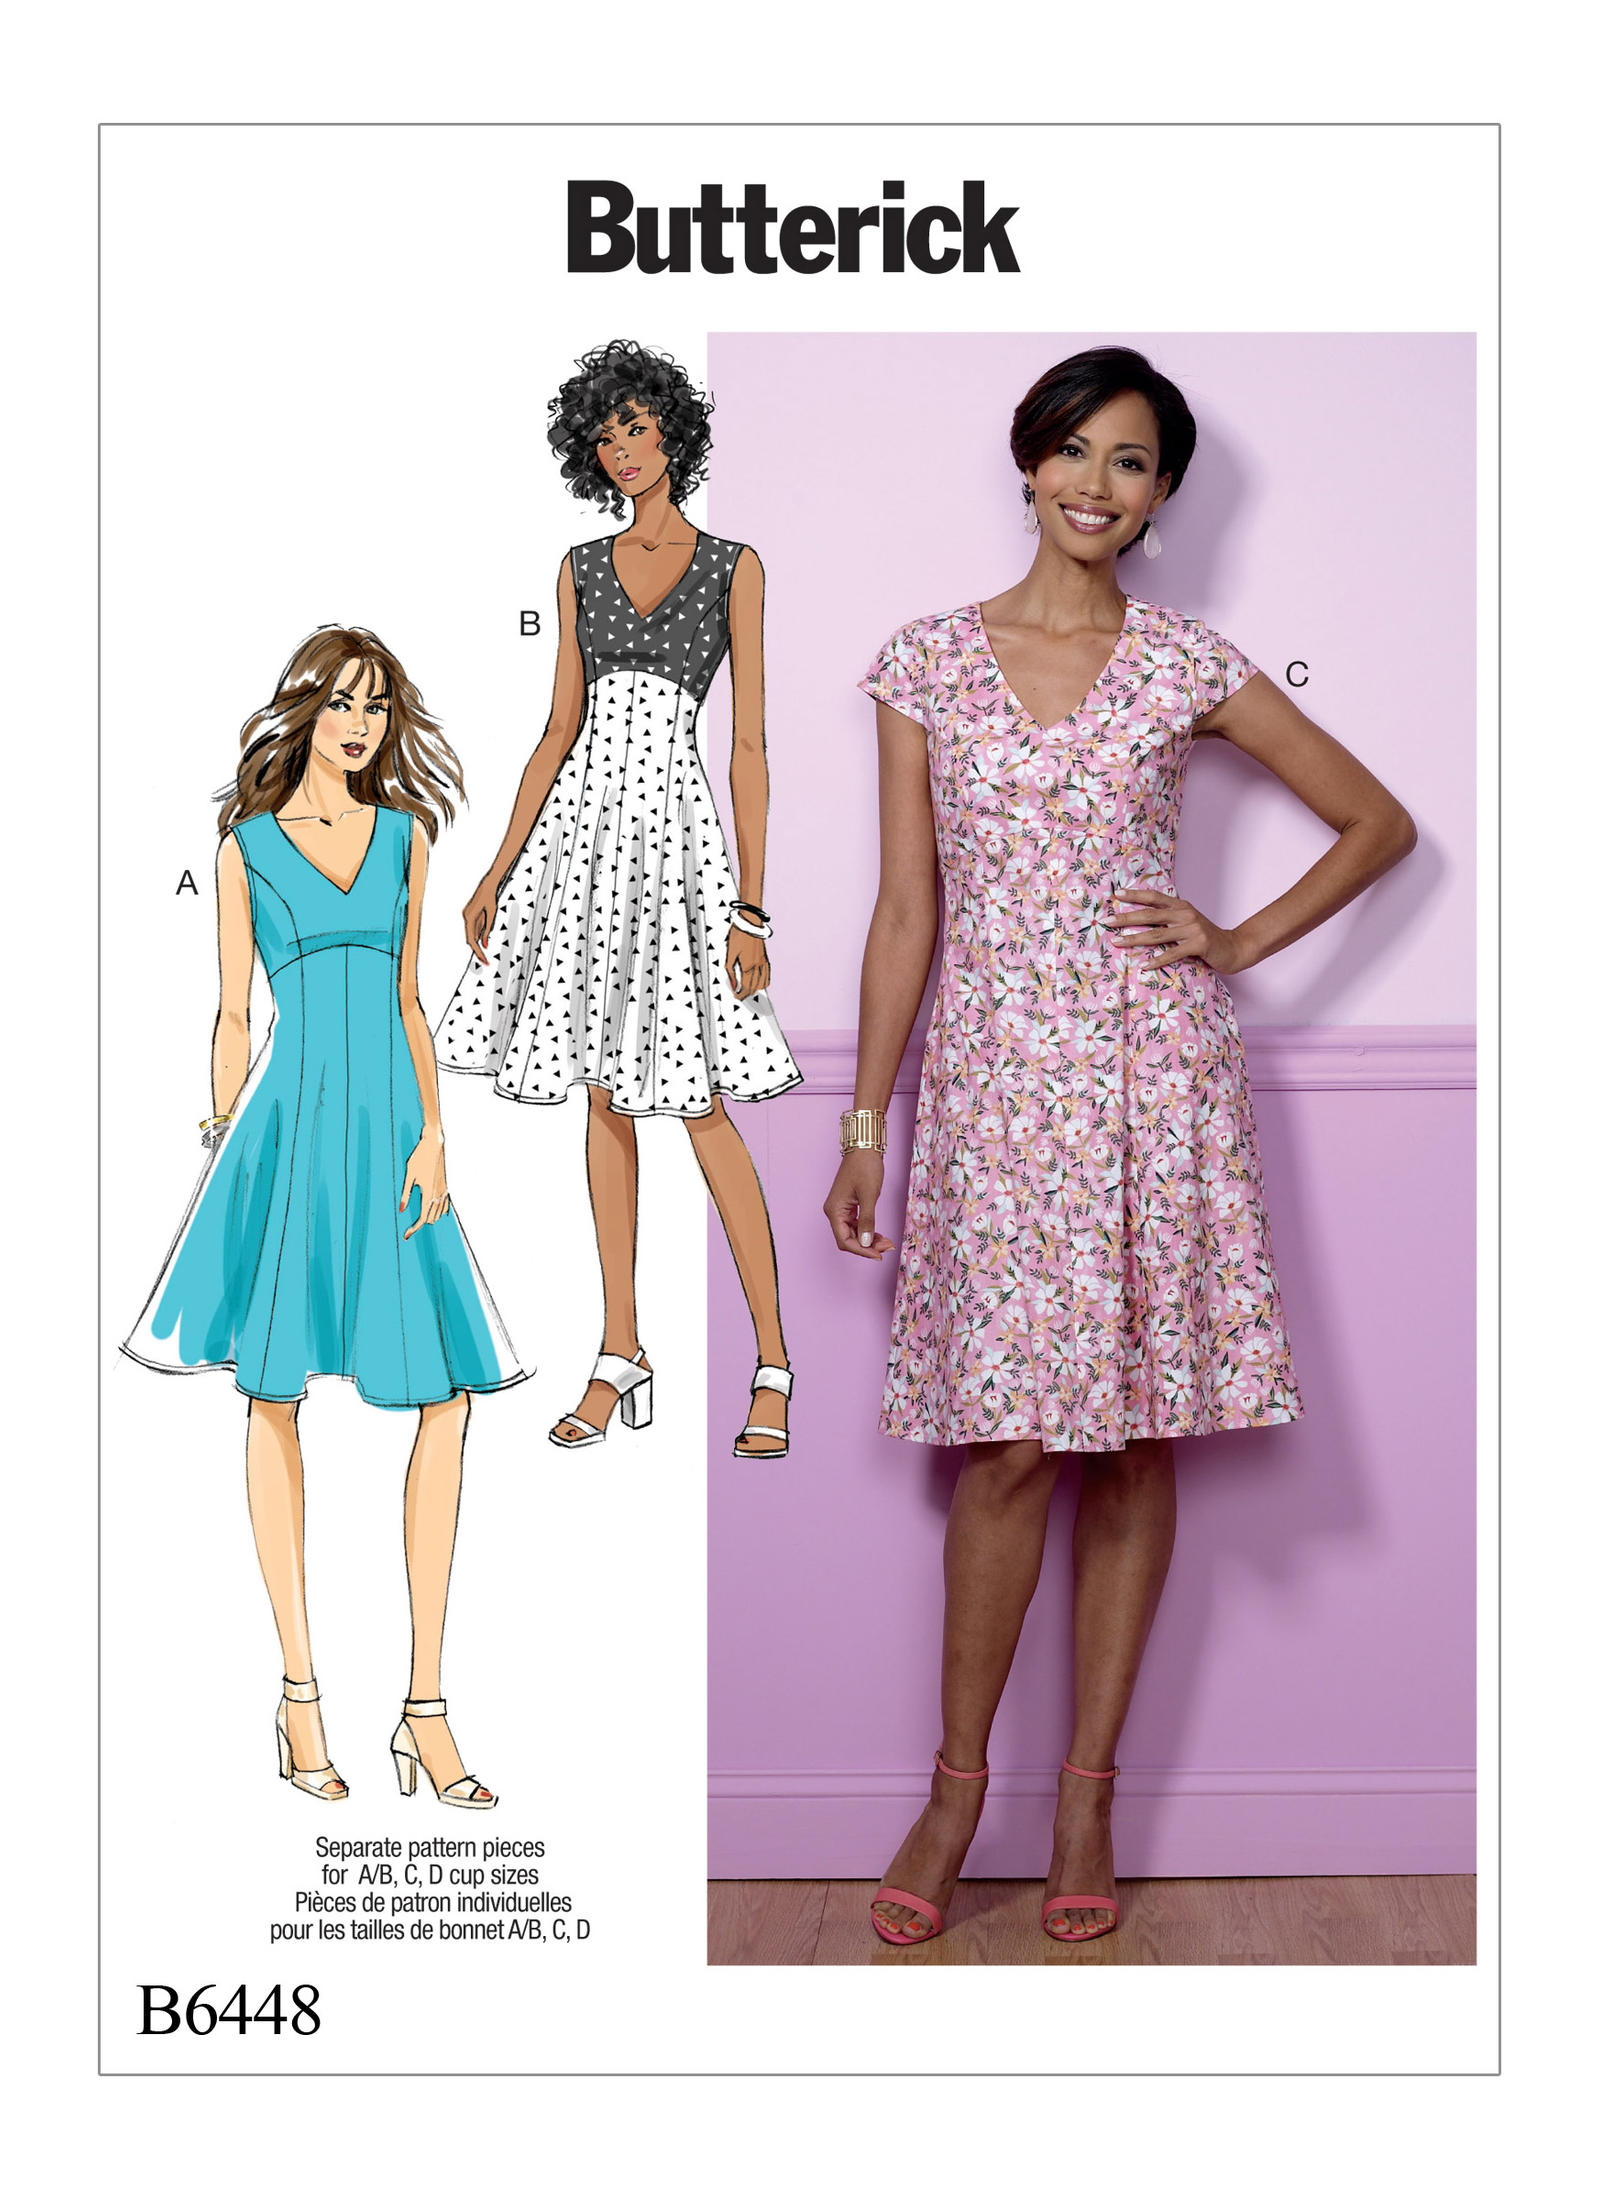 https://images.patternreview.com/sewing/patterns/butterick/2017/6448/6448.jpg